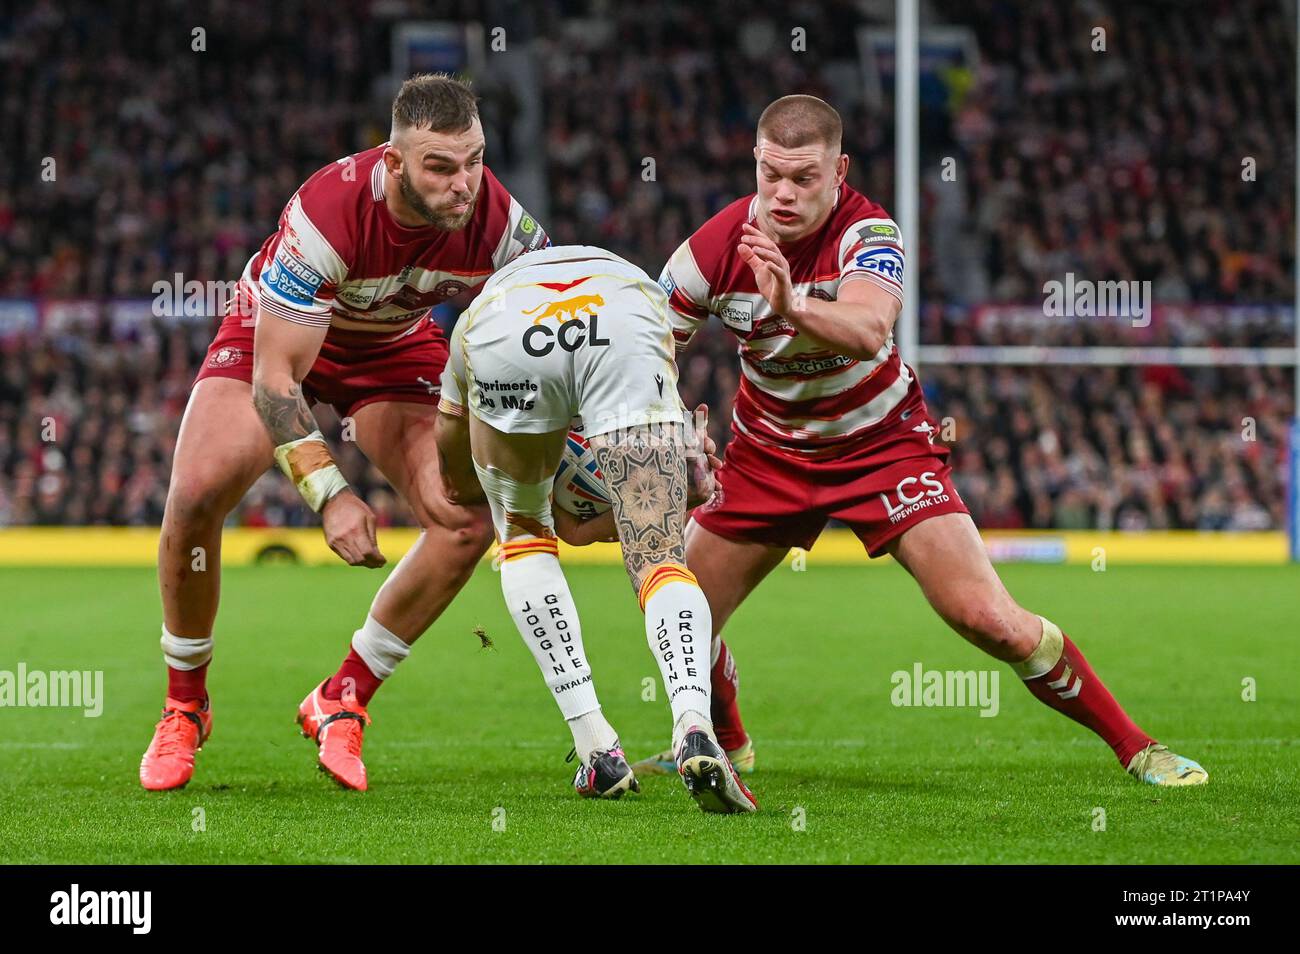 Sam Tomkins #29 of Catalans Dragons is tackled by Morgan Smithies #13 of Wigan Warriors during the Betfred Super League Grand Final match Wigan Warriors vs Catalans Dragons at Old Trafford, Manchester, United Kingdom, 14th October 2023 (Photo by Craig Cresswell/News Images) in, on 10/14/2023. (Photo by Craig Cresswell/News Images/Sipa USA) Credit: Sipa USA/Alamy Live News Stock Photo